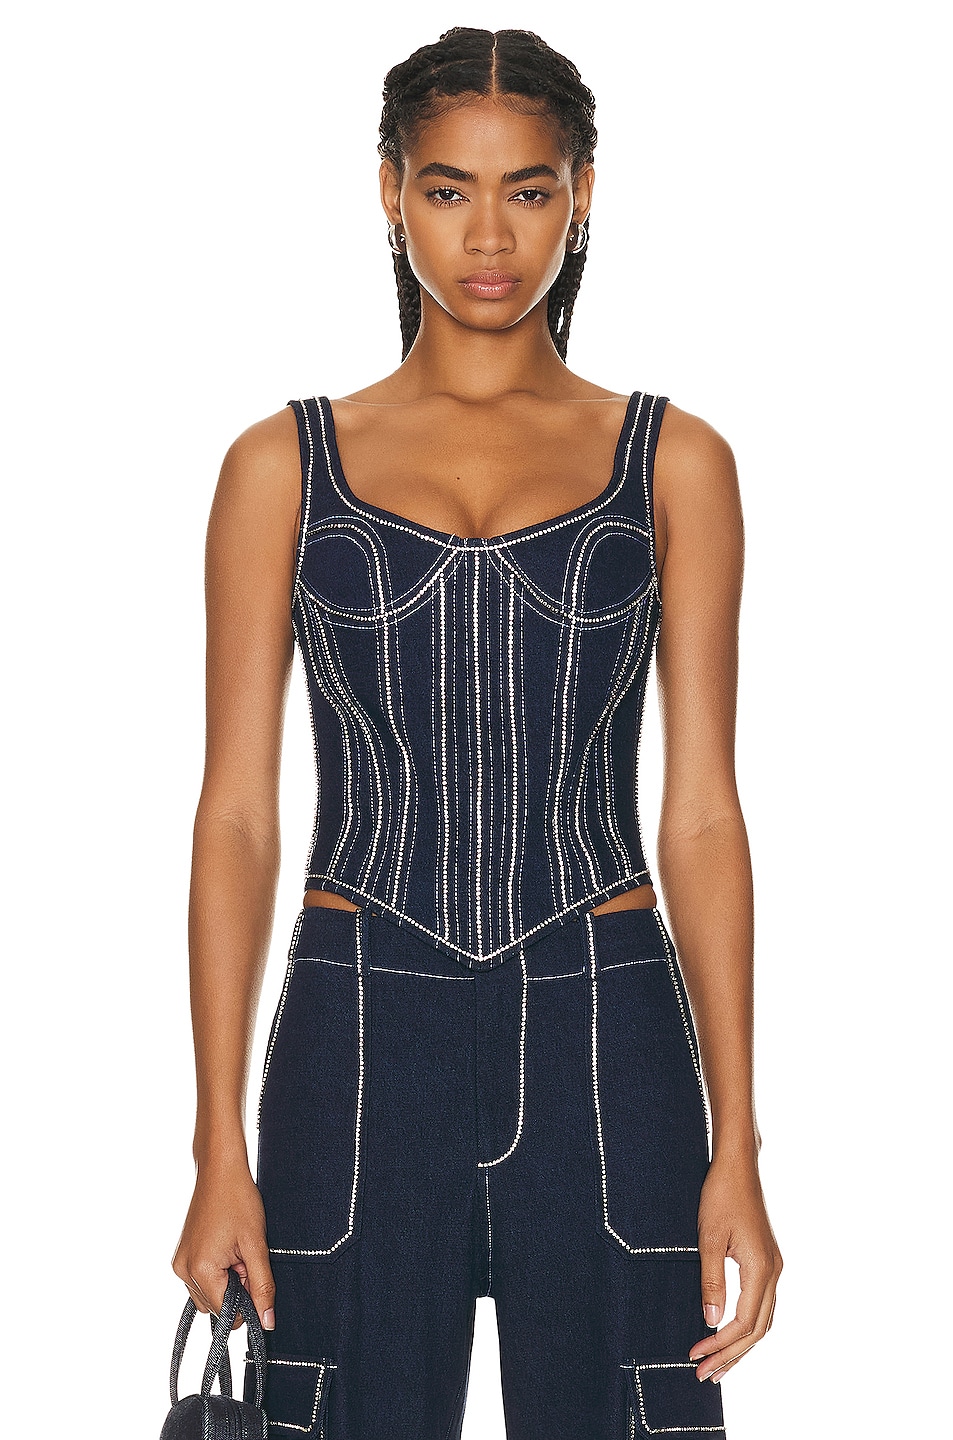 Image 1 of The New Arrivals by Ilkyaz Ozel Kaia Corset in Le Bibliotheque